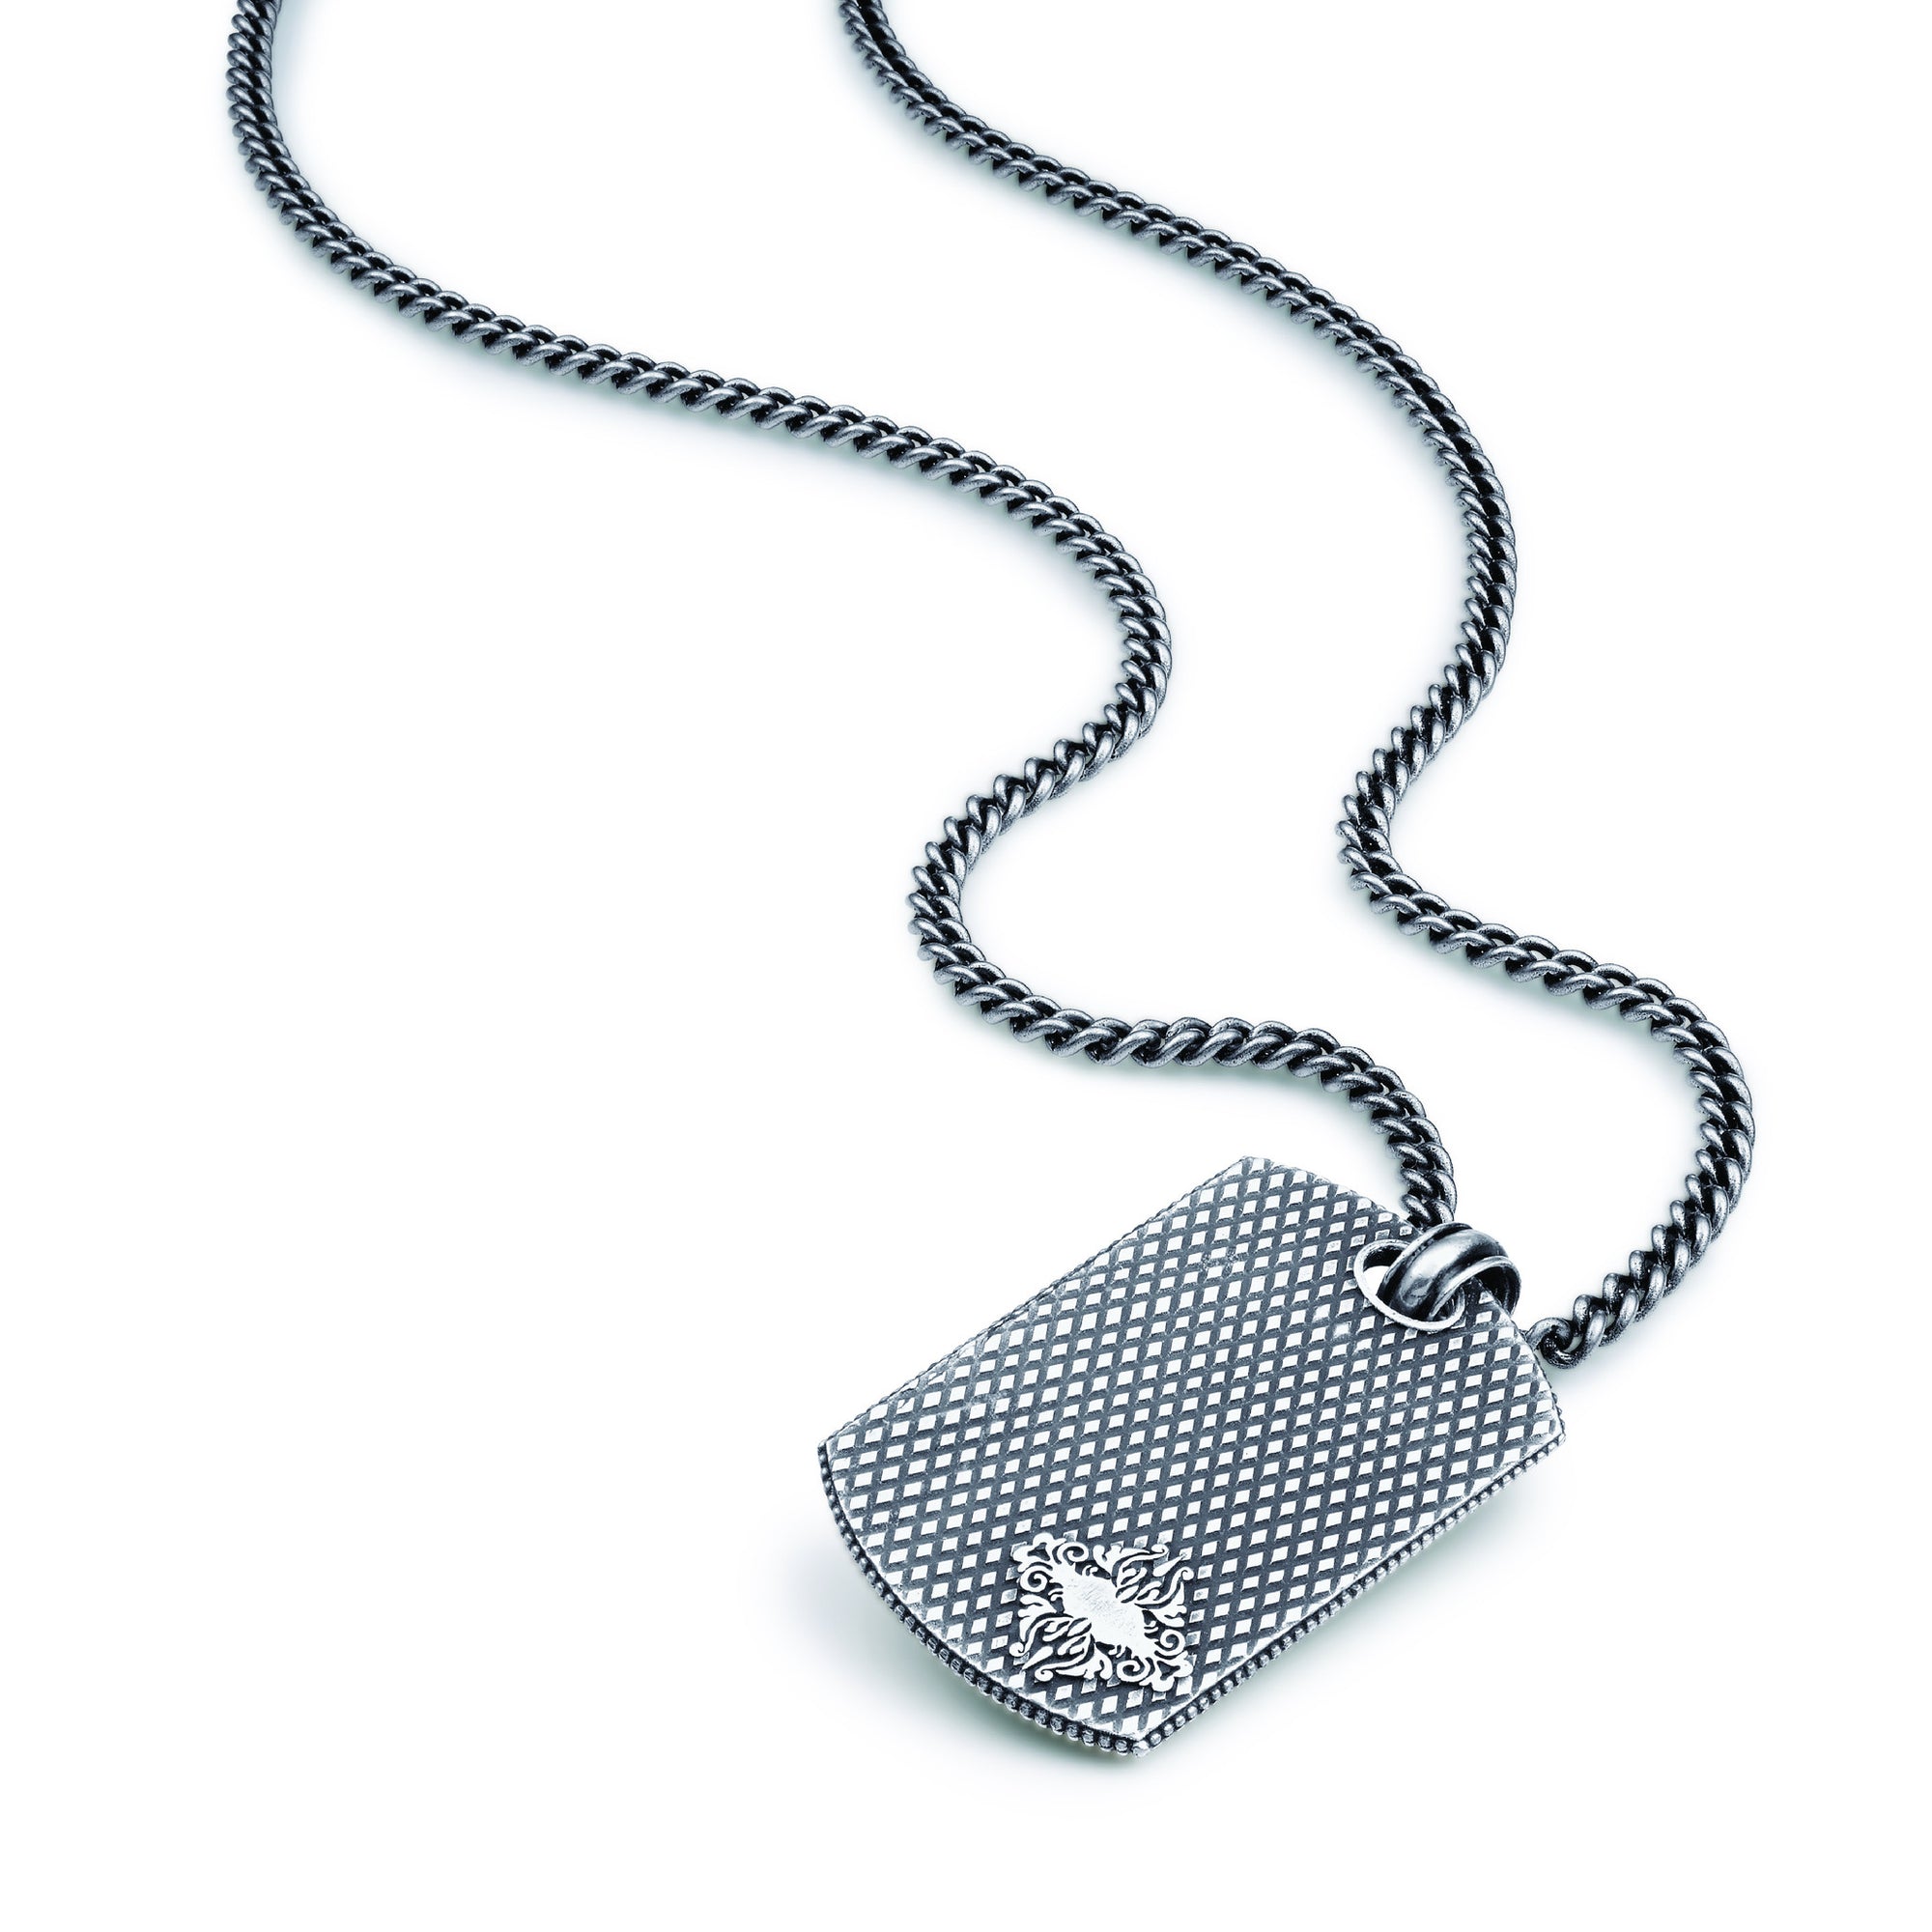 Men's Oxidized Sterling Silver Dog Tag Necklace in Brown Tiger's Eye